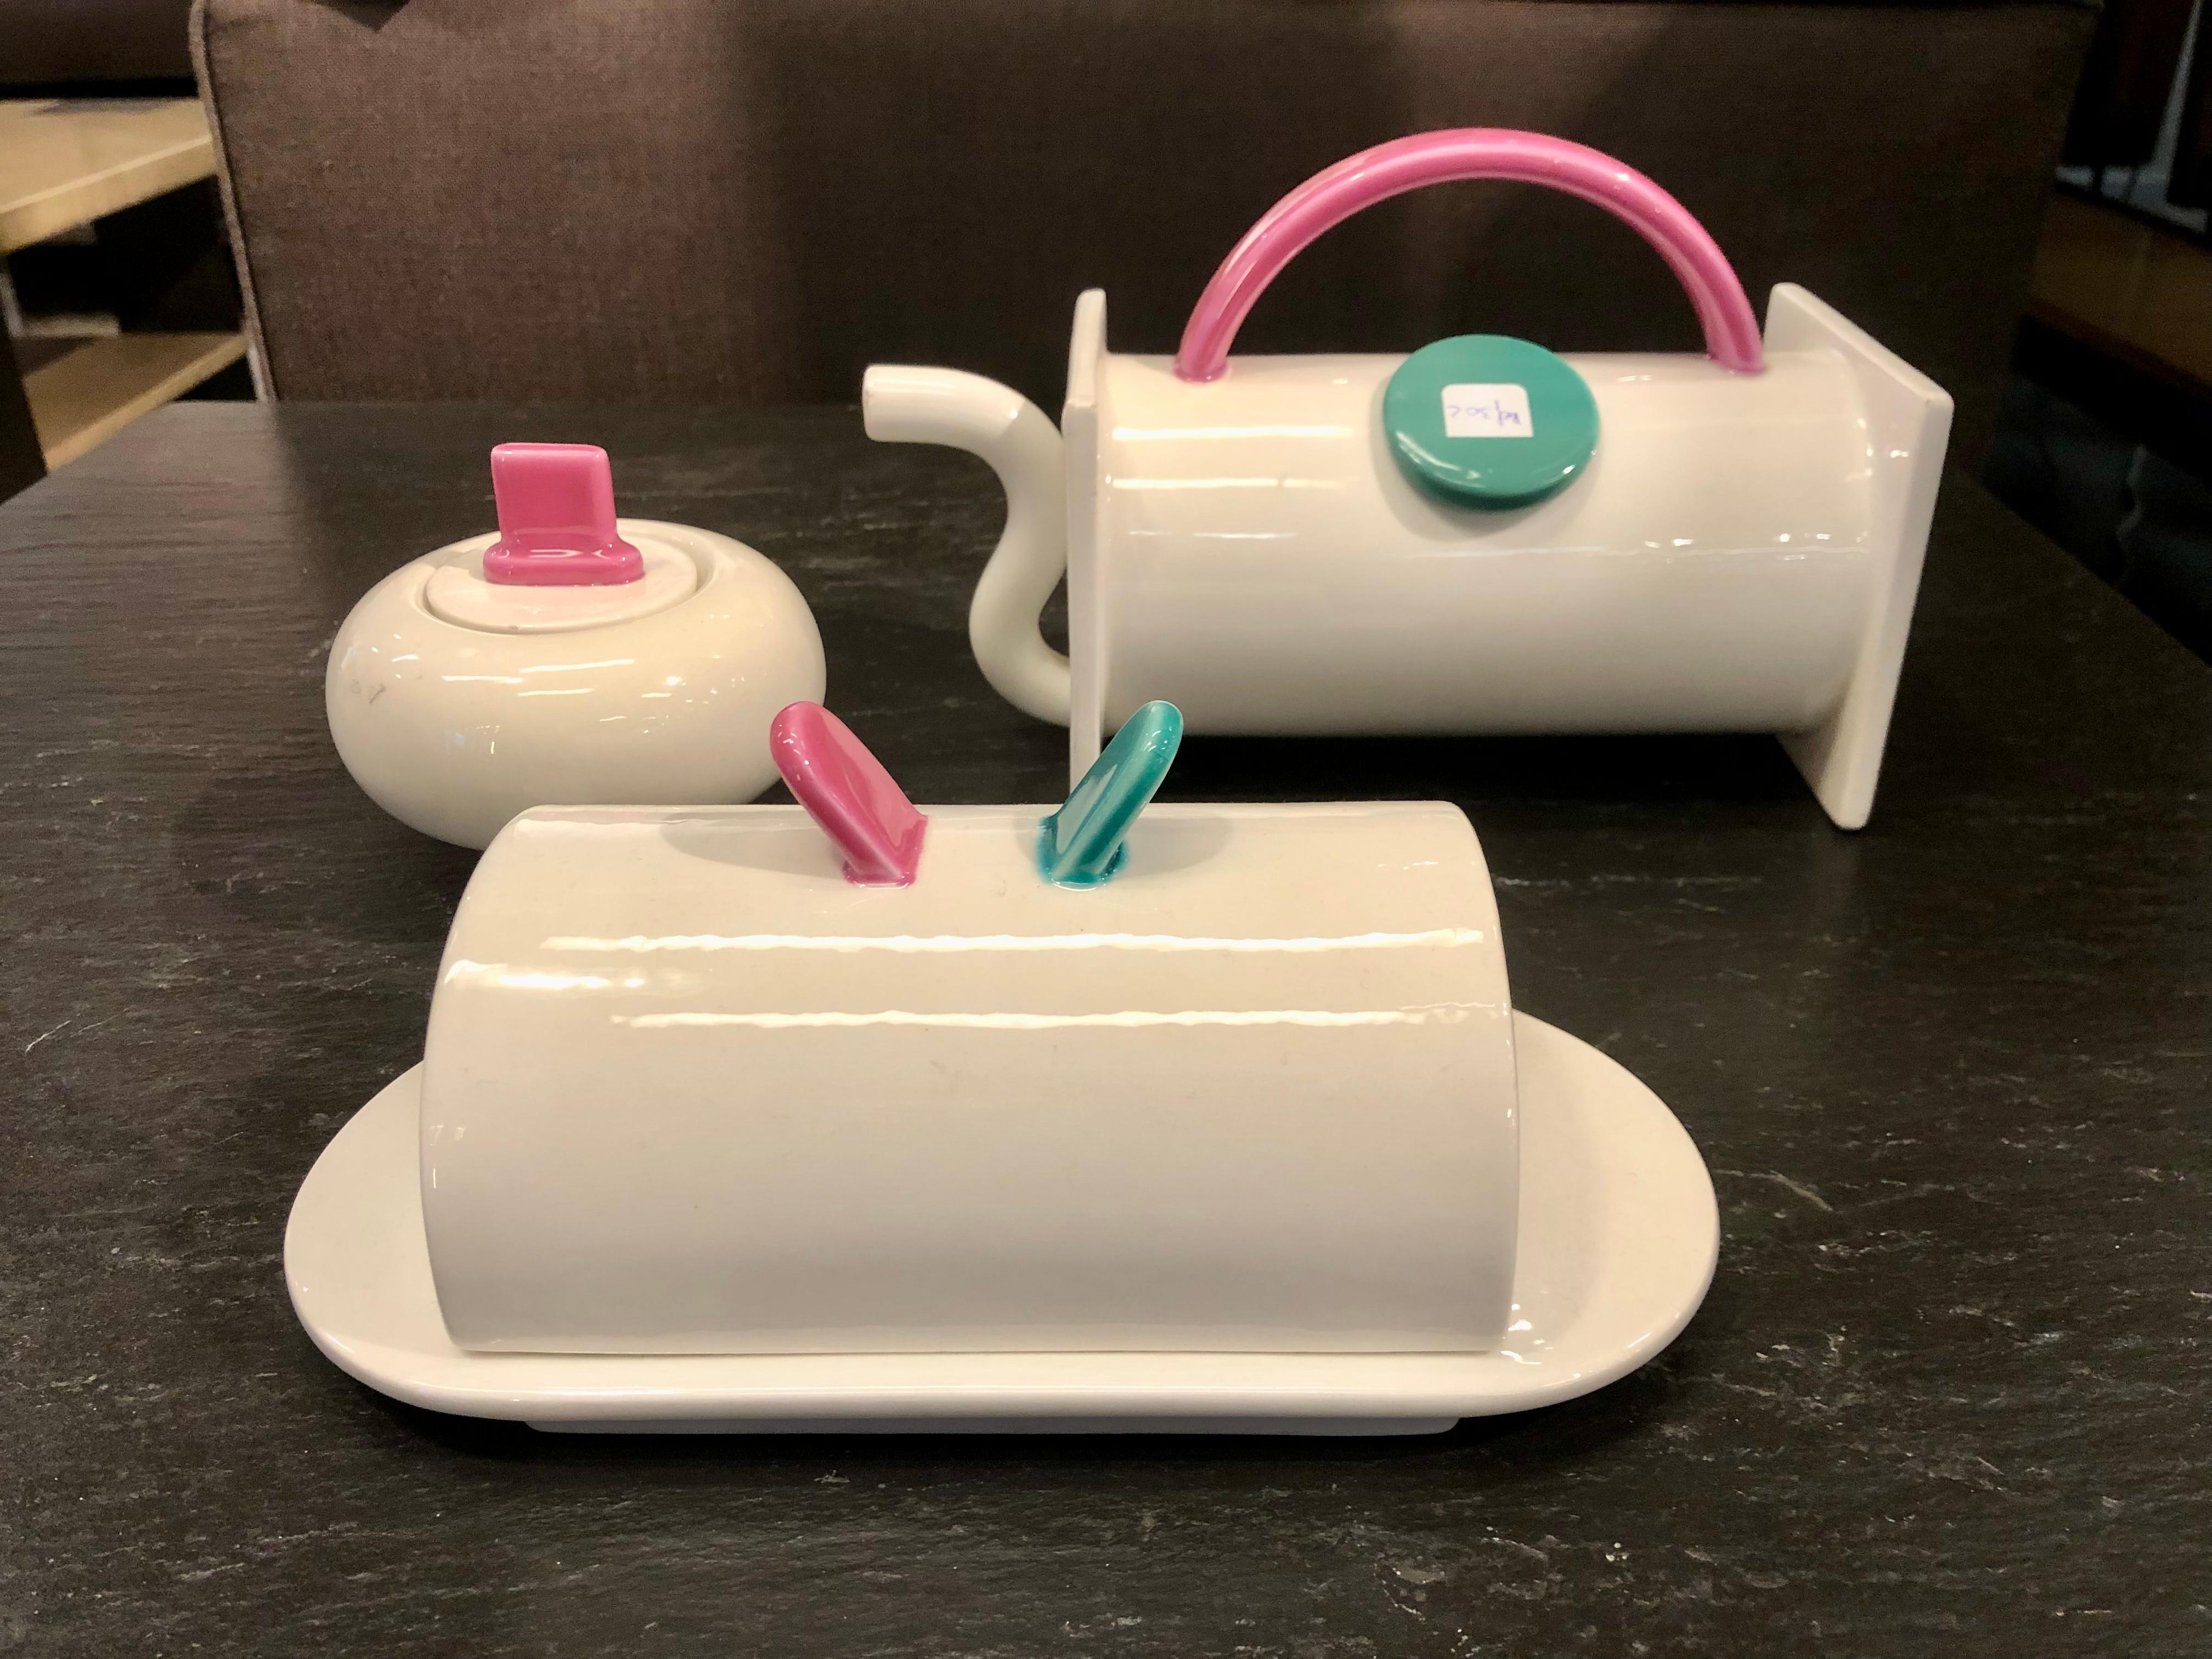 Tea Set of 3 pieces from Marco Zanini for Bitossi from Hollywood collection in early ‘80.
Tea pot named Marylin 
Butter dish named Greta
And small sugar bowl.